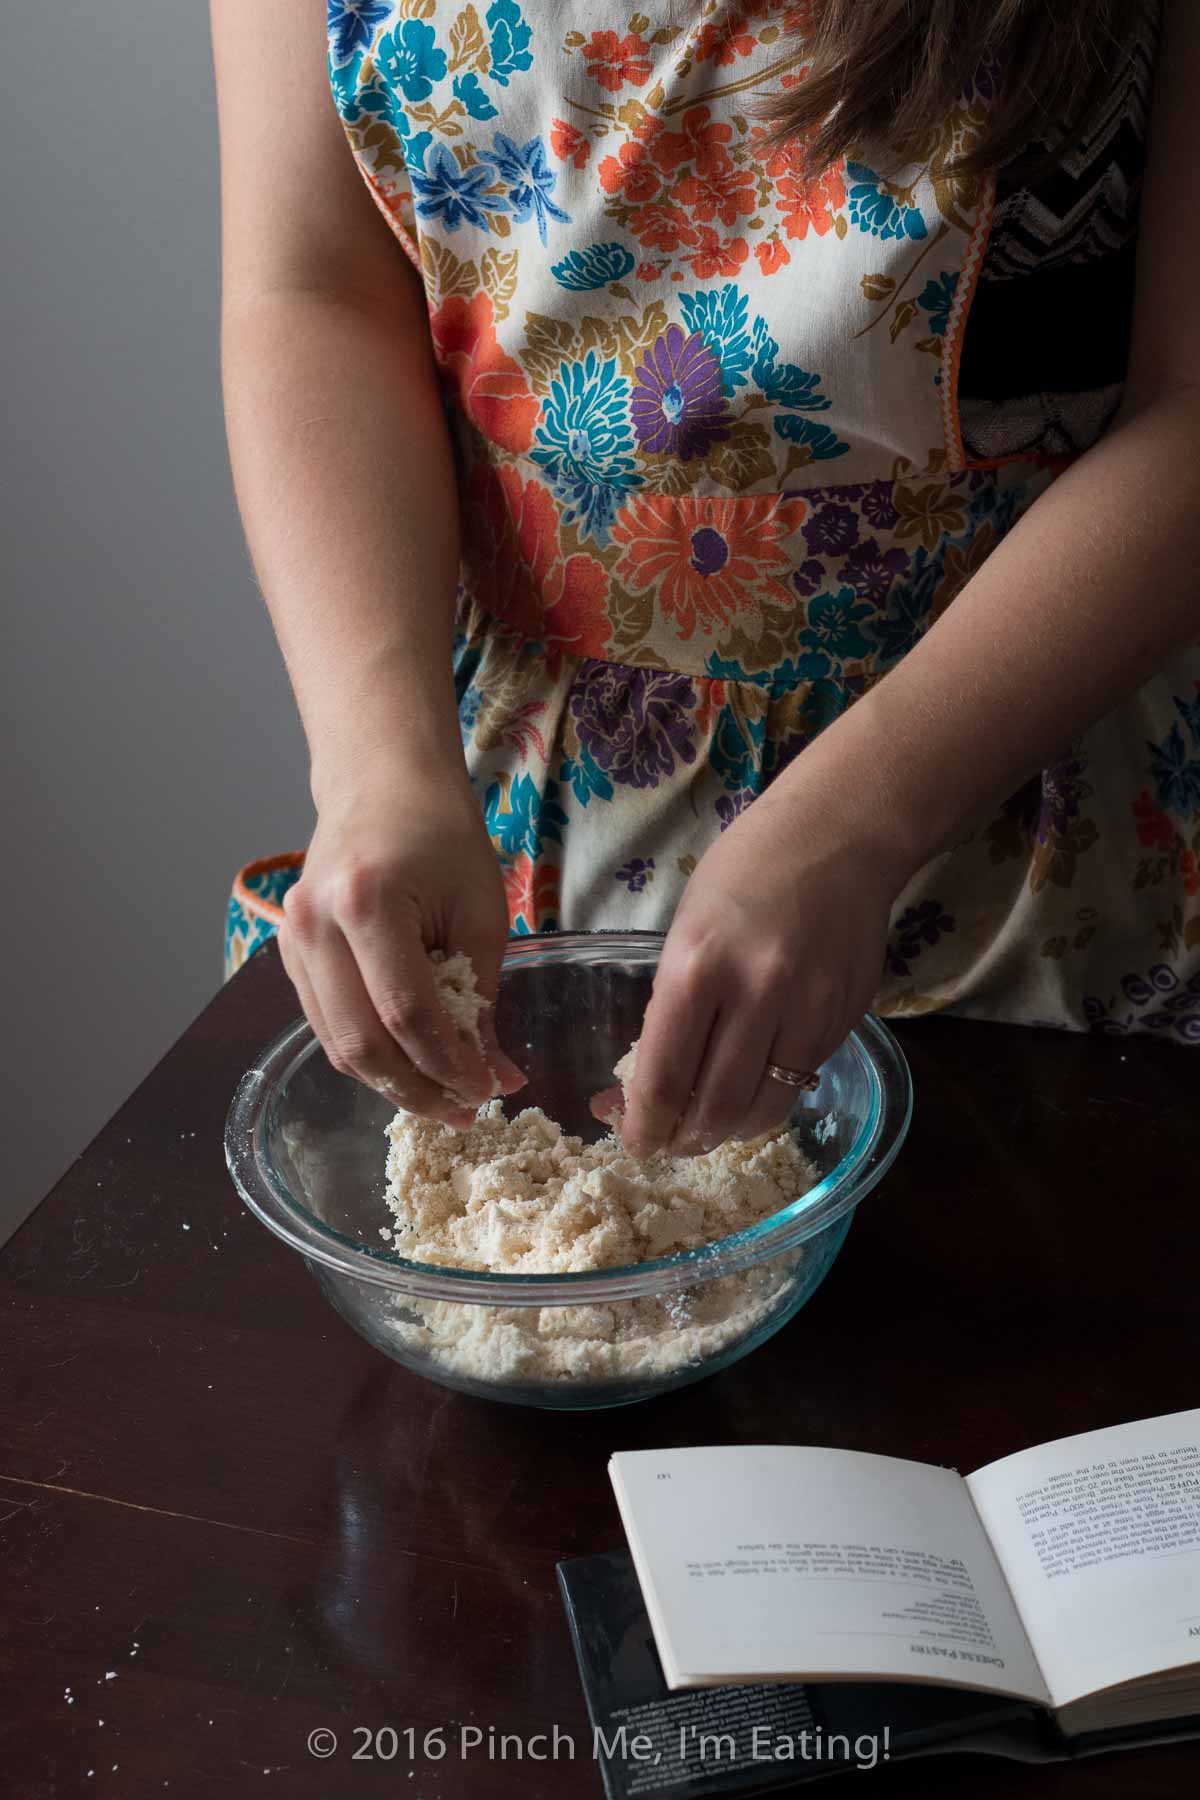 Woman making pastry dough in glass bowl.